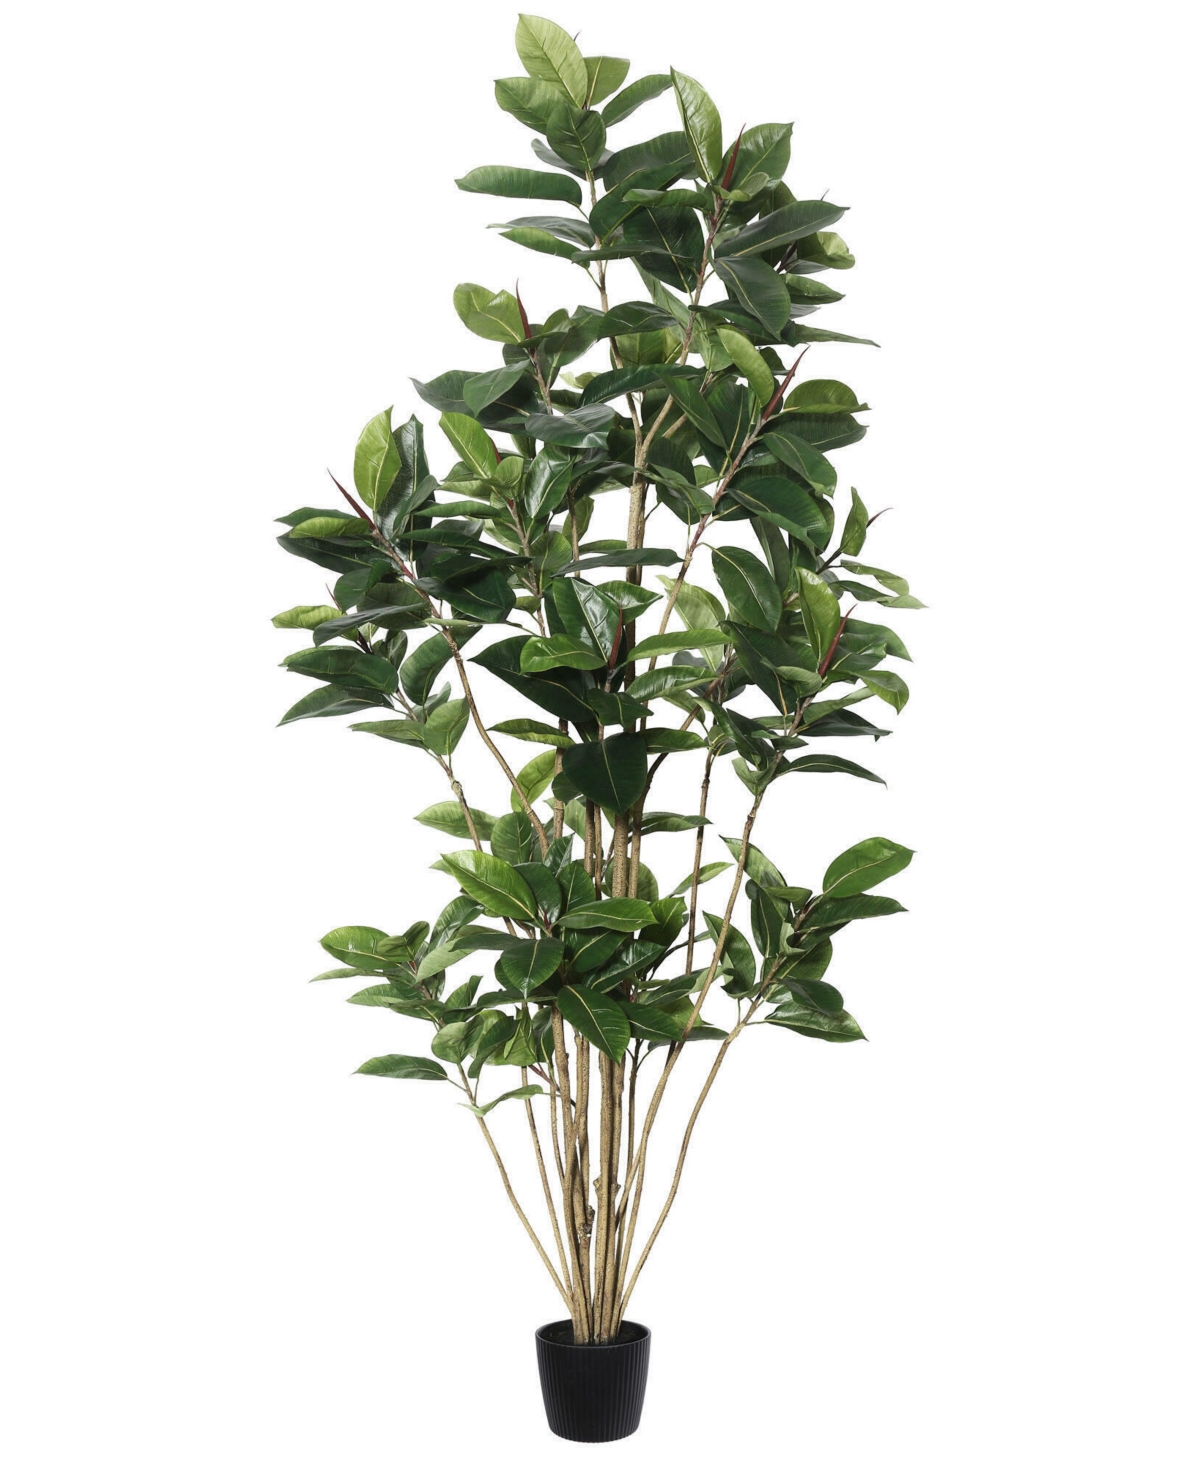 7' Potted Artificial Rubber Tree